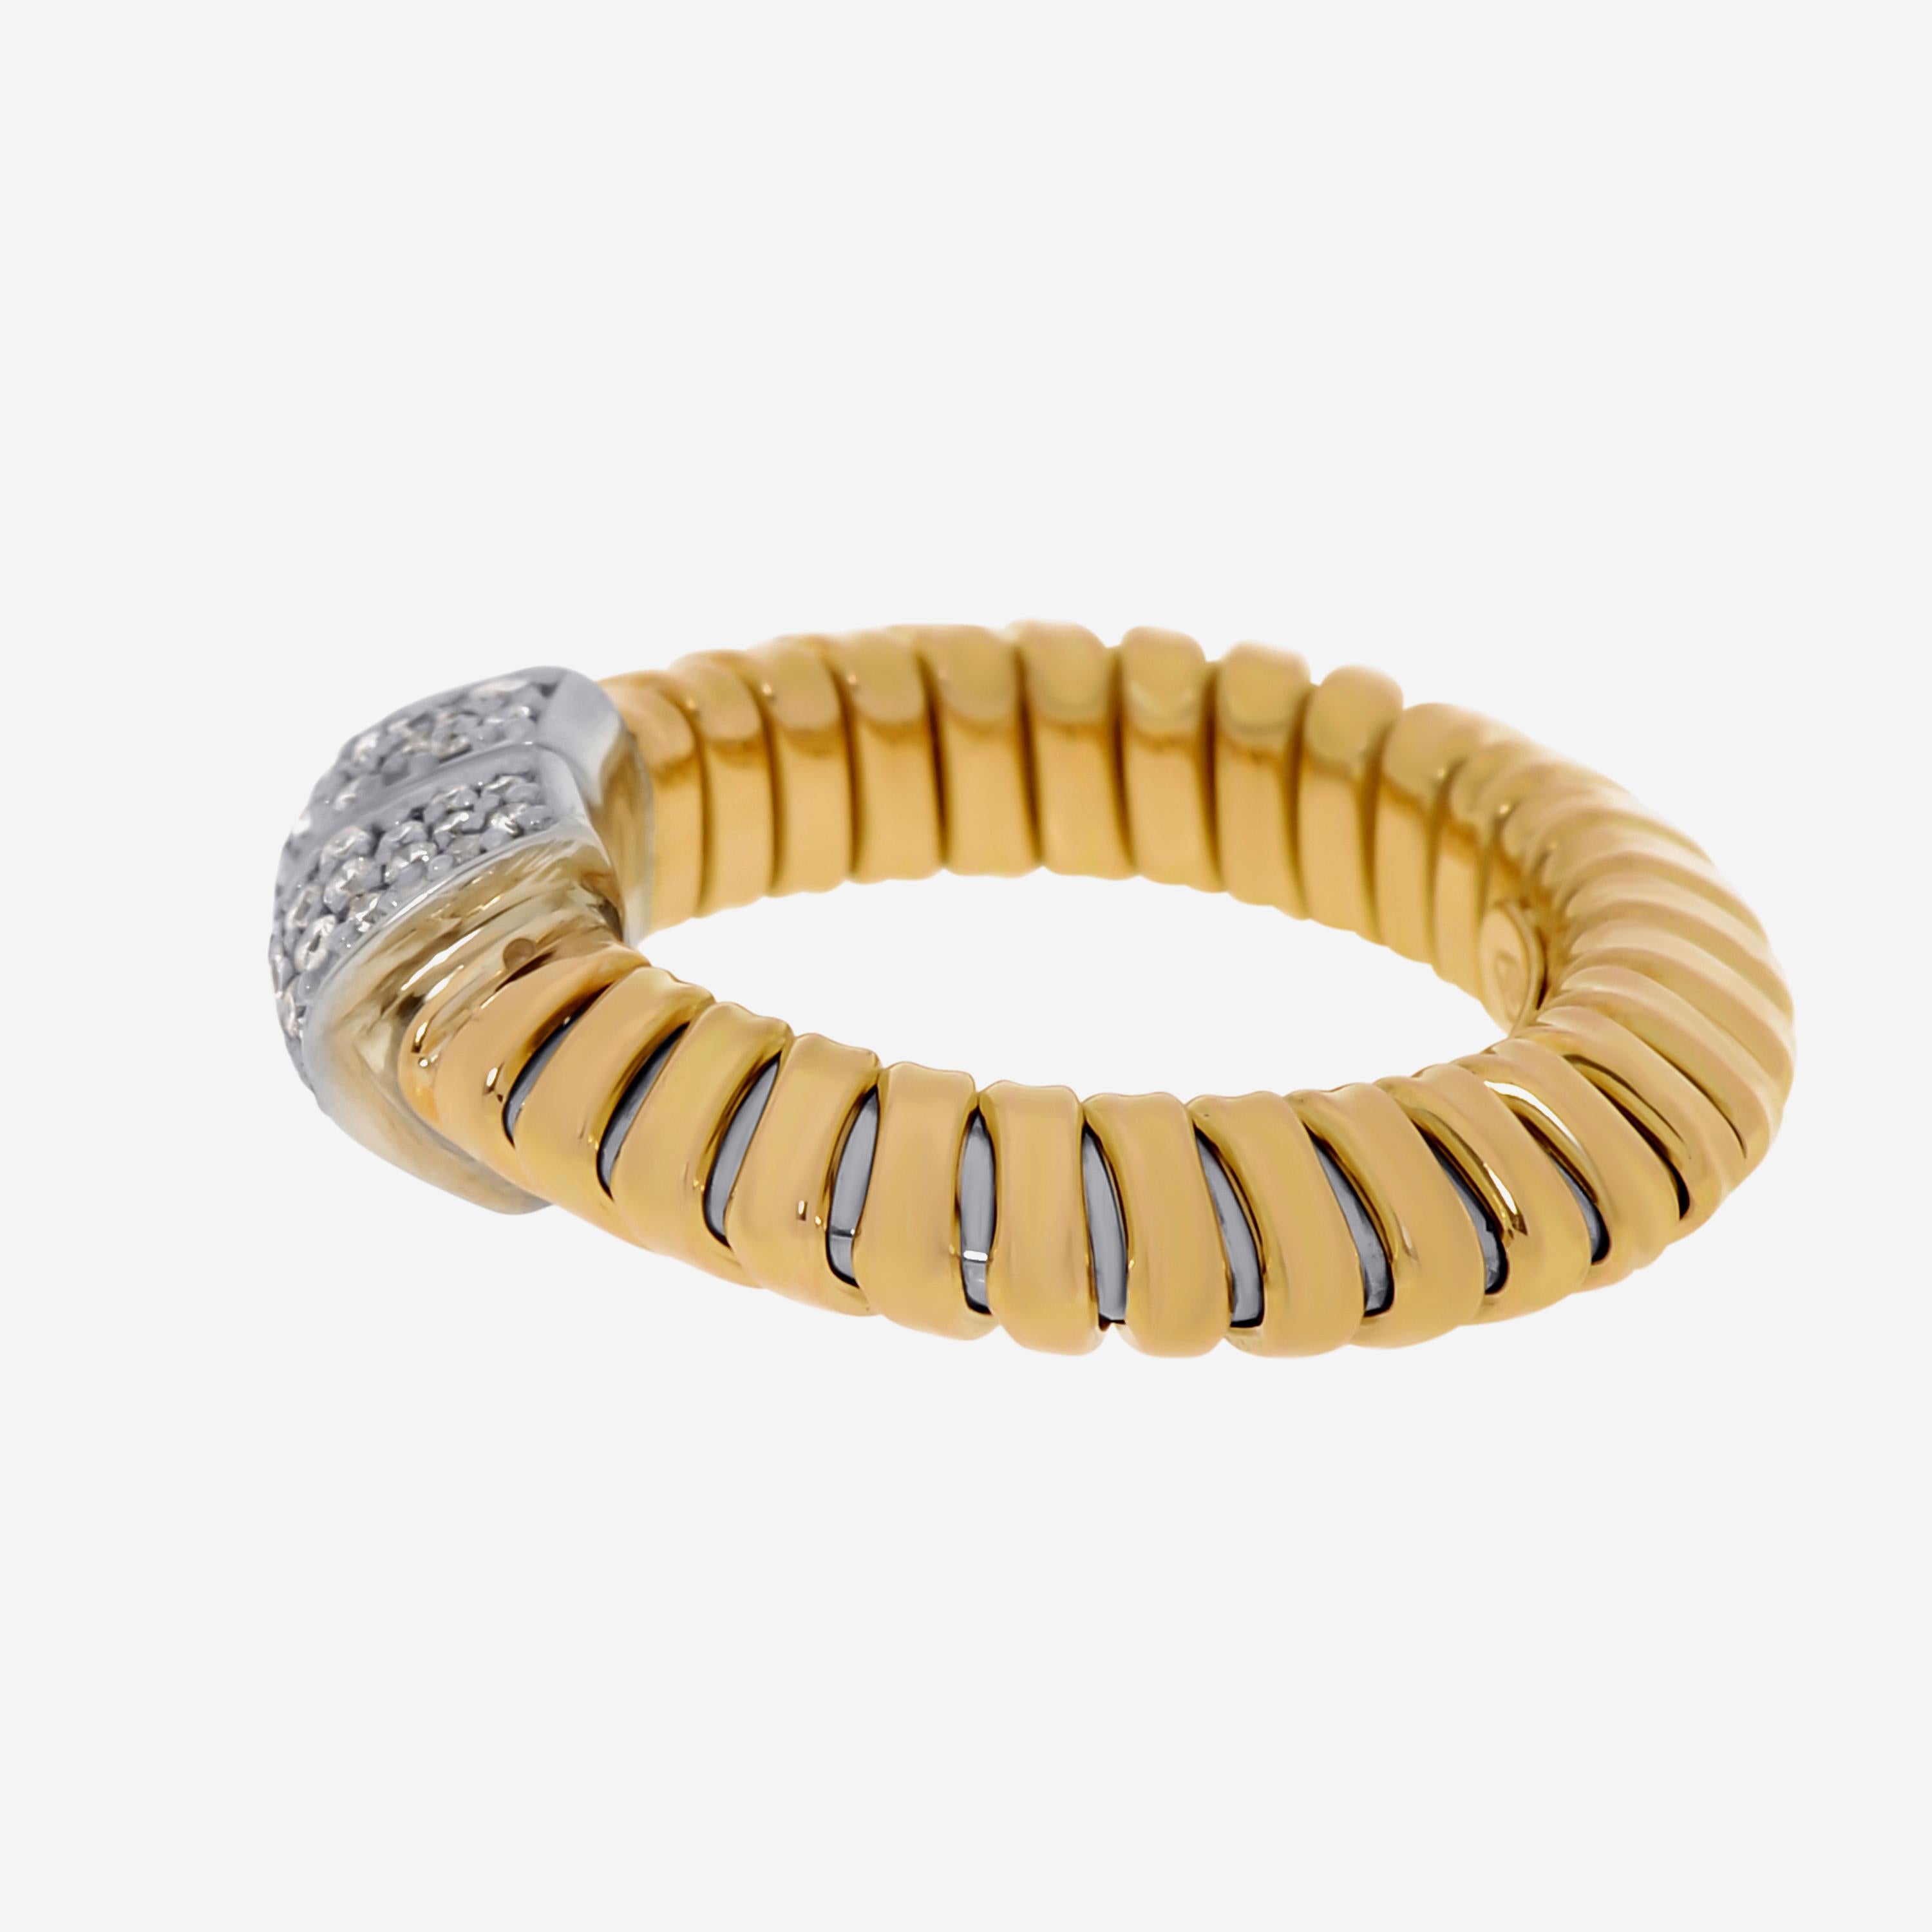 Contemporary Tessitore Tubogas 18K Yellow Gold, Diamond Flexible Ring Sz. 6.25 For Sale